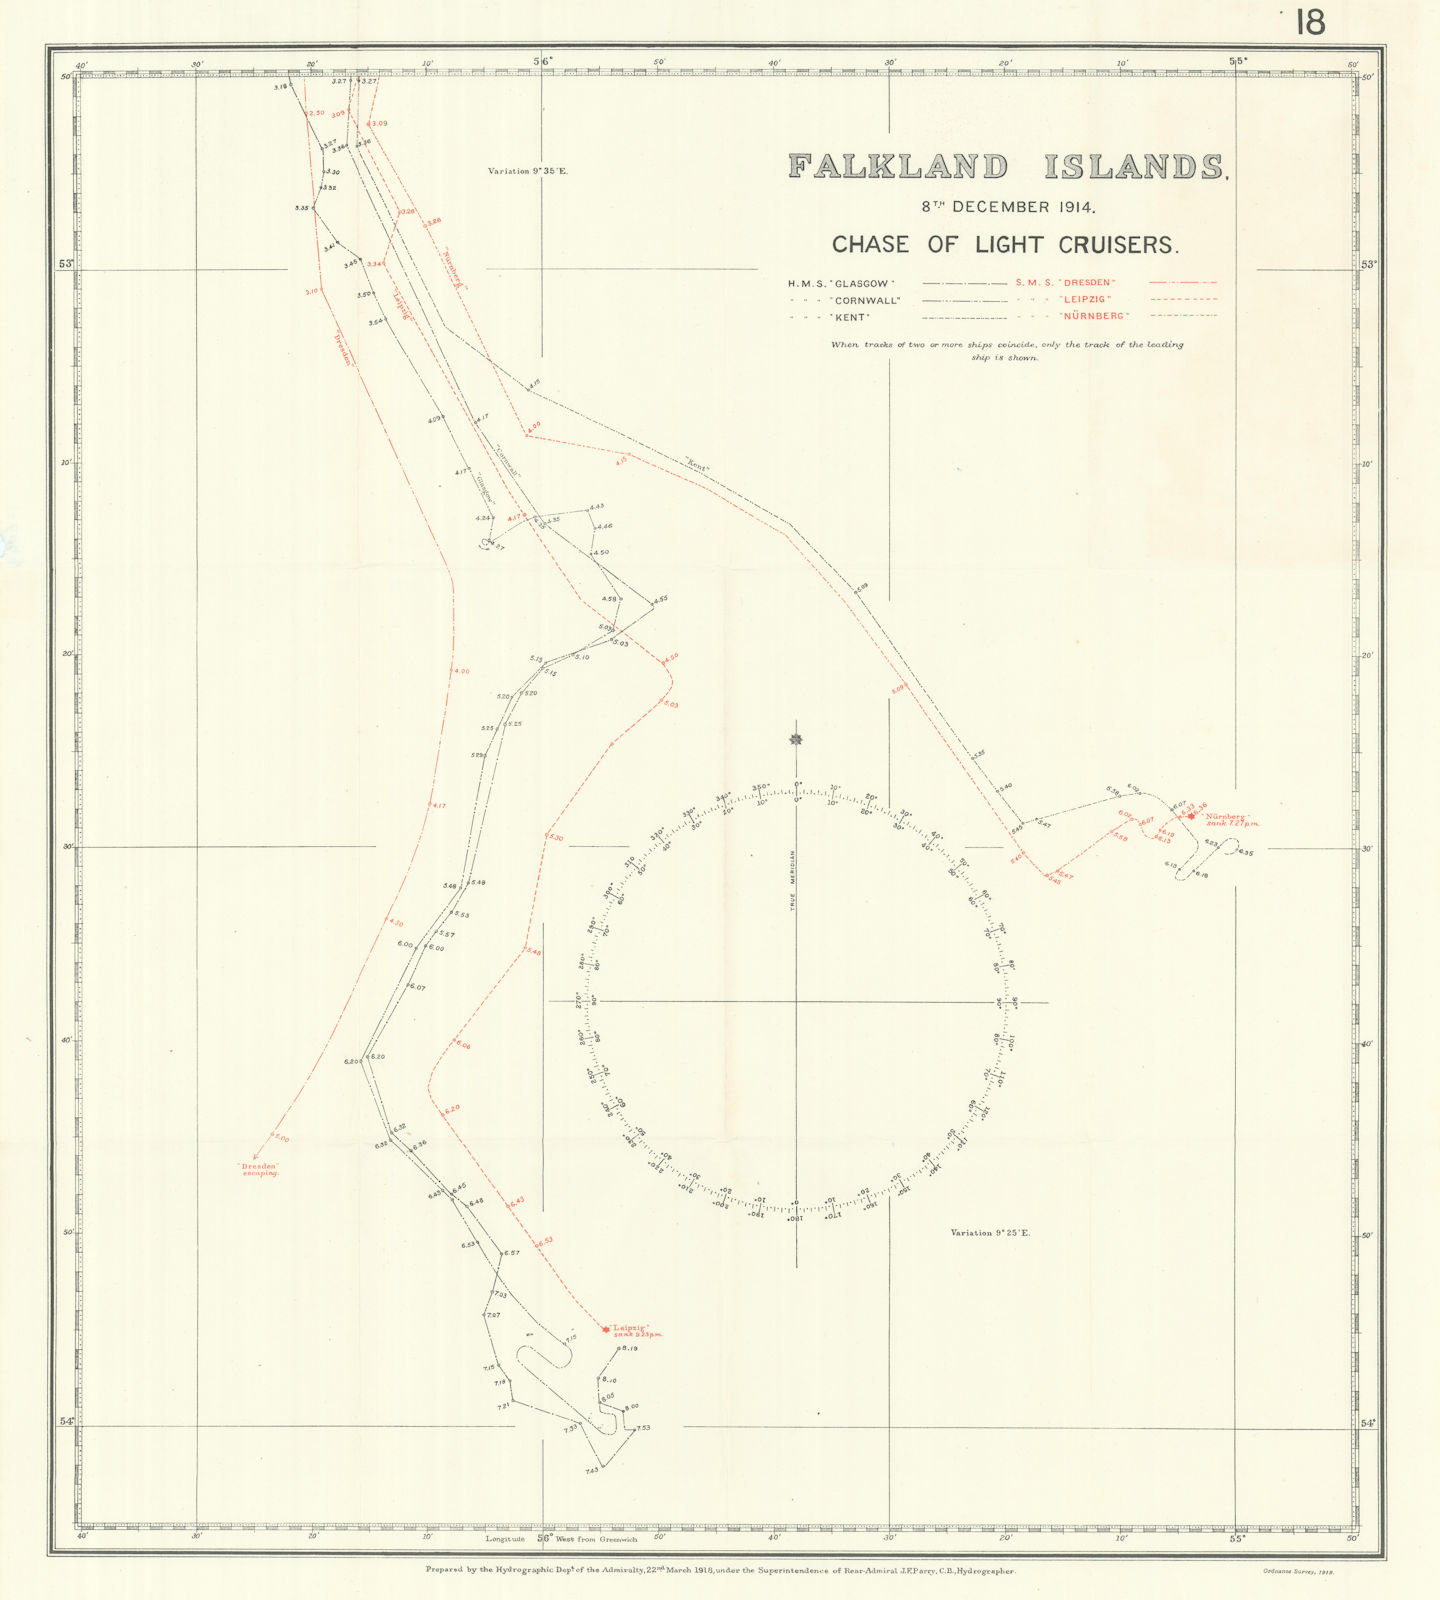 Battle of the Falkland Islands 8th December 1914. Light Cruisers chase 1920 map